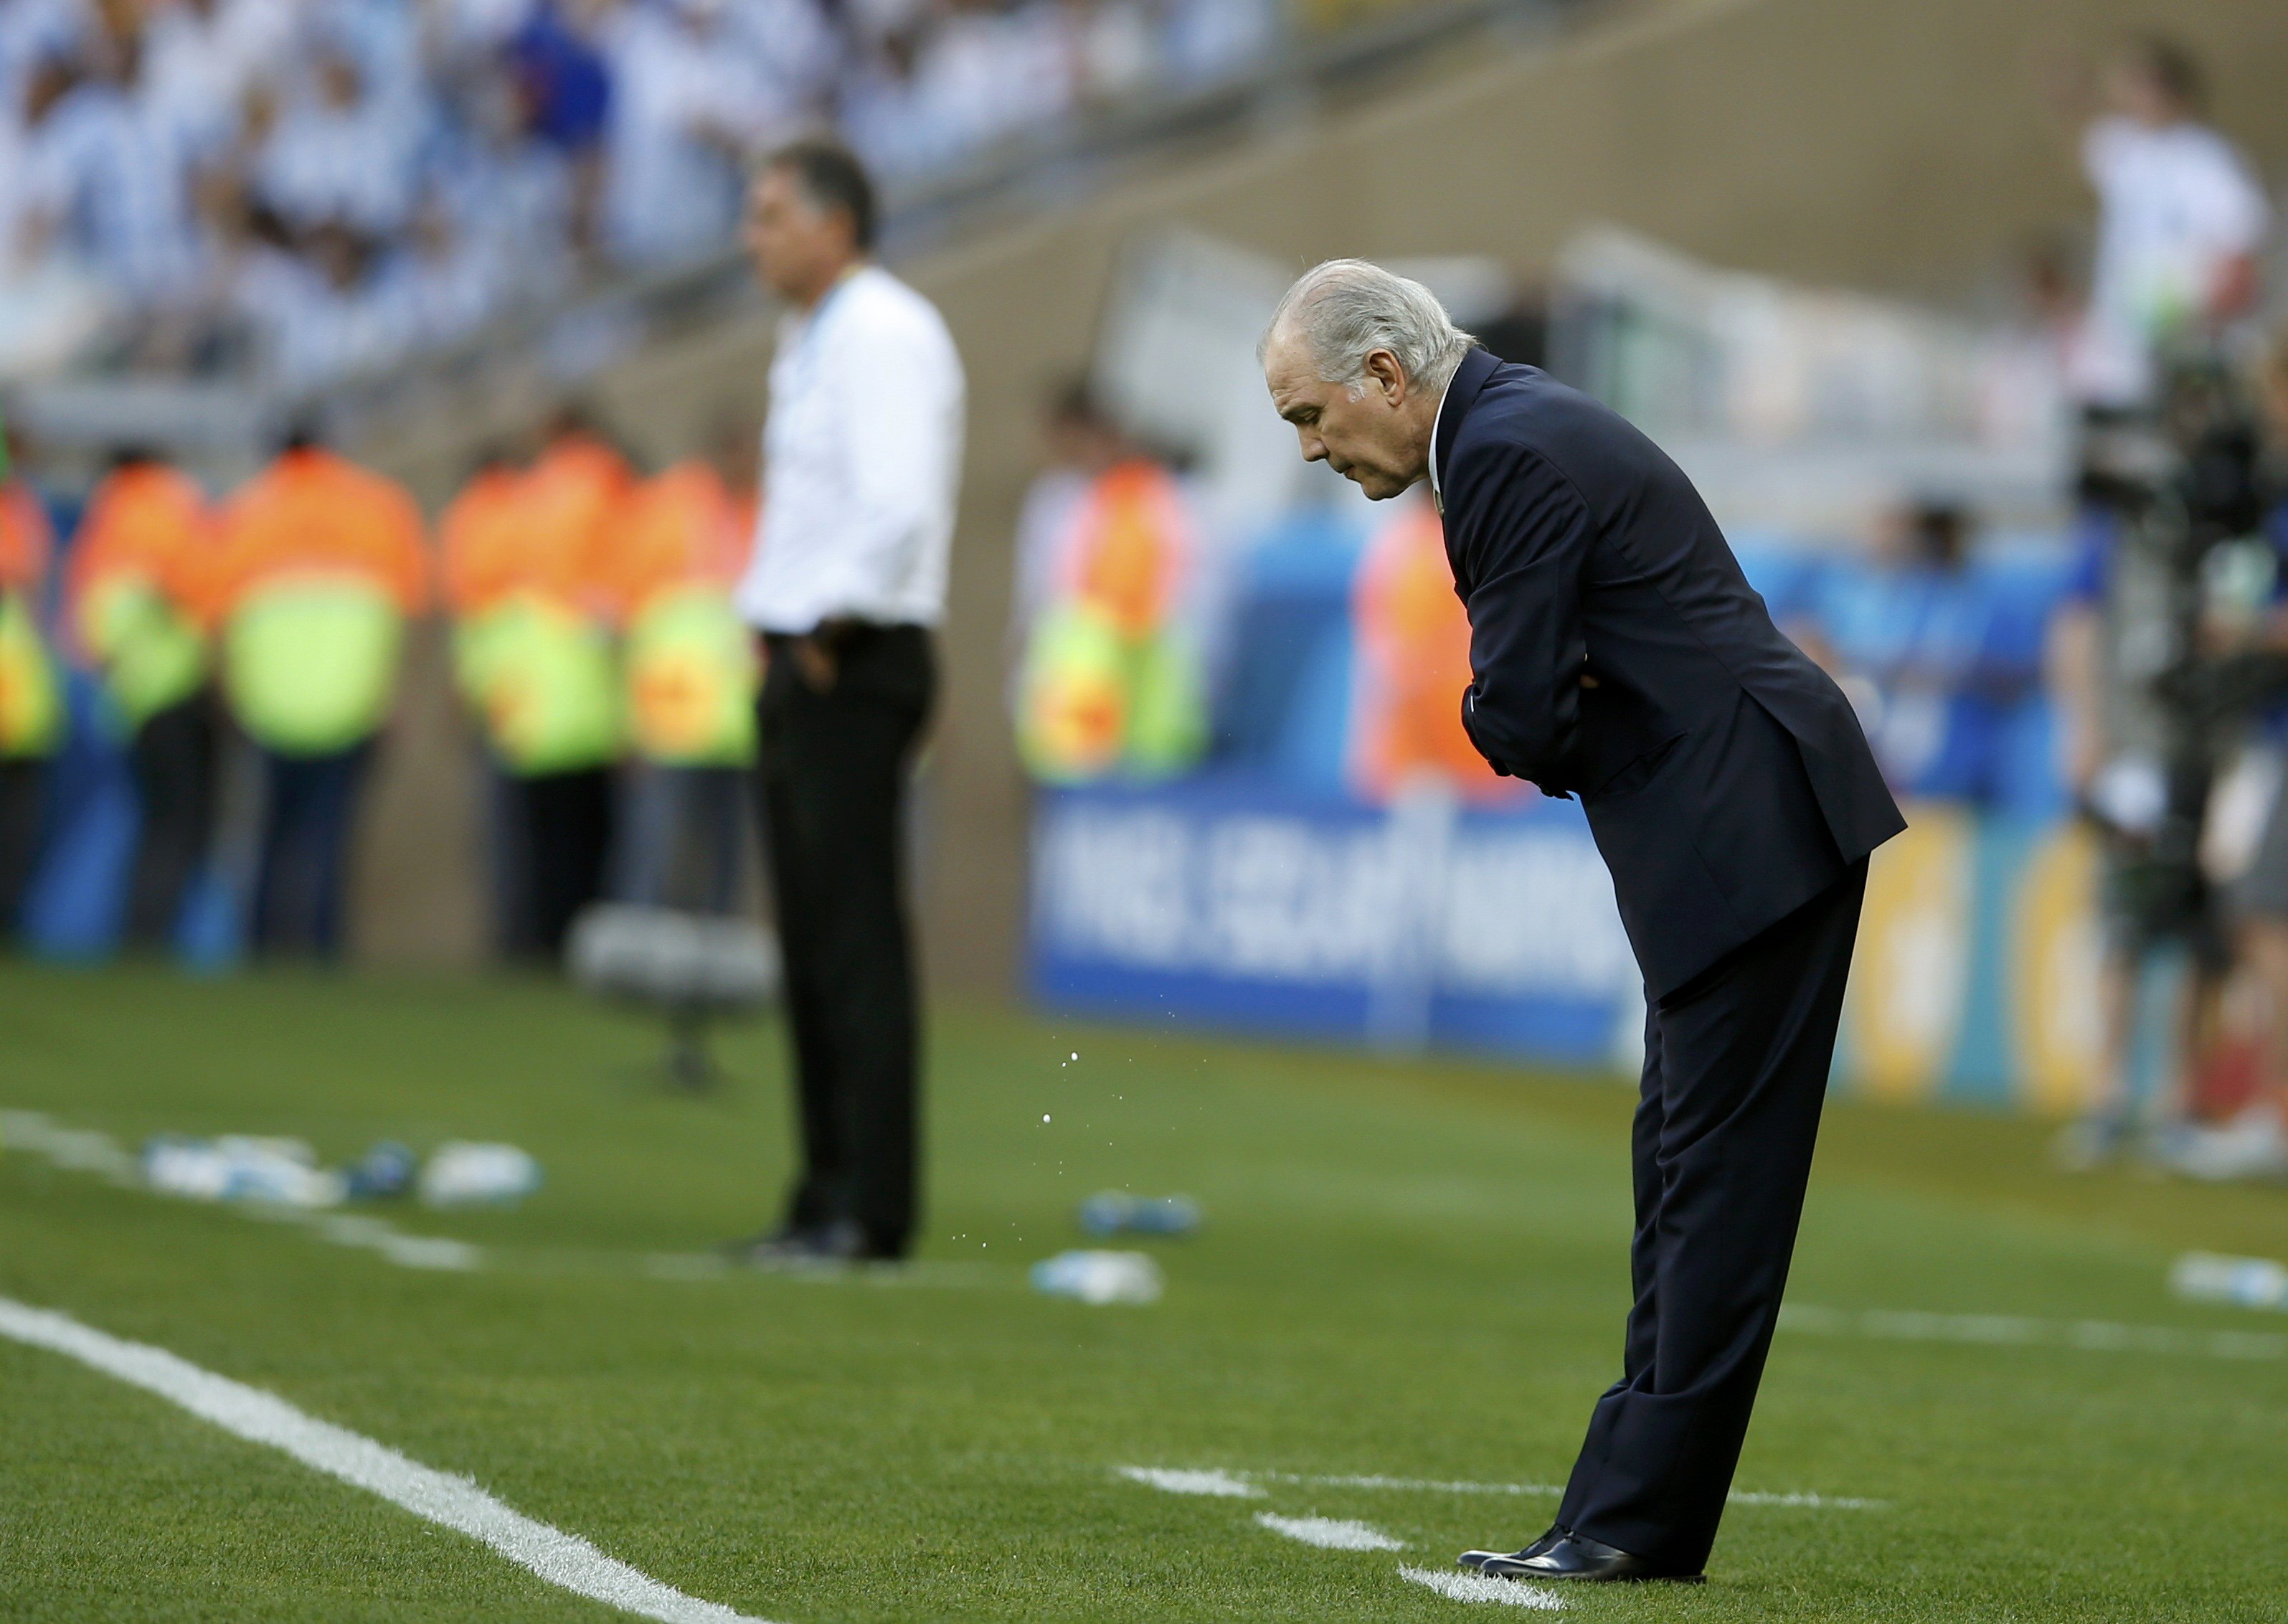 Argentina's coach Alejandro Sabella reacts during the 2014 World Cup Group F soccer match between Argentina and Iran at the the Mineirao stadium in Belo Horizonte June 21, 2014.  REUTERS/Sergio Perez (BRAZIL  - Tags: SOCCER SPORT WORLD CUP)  